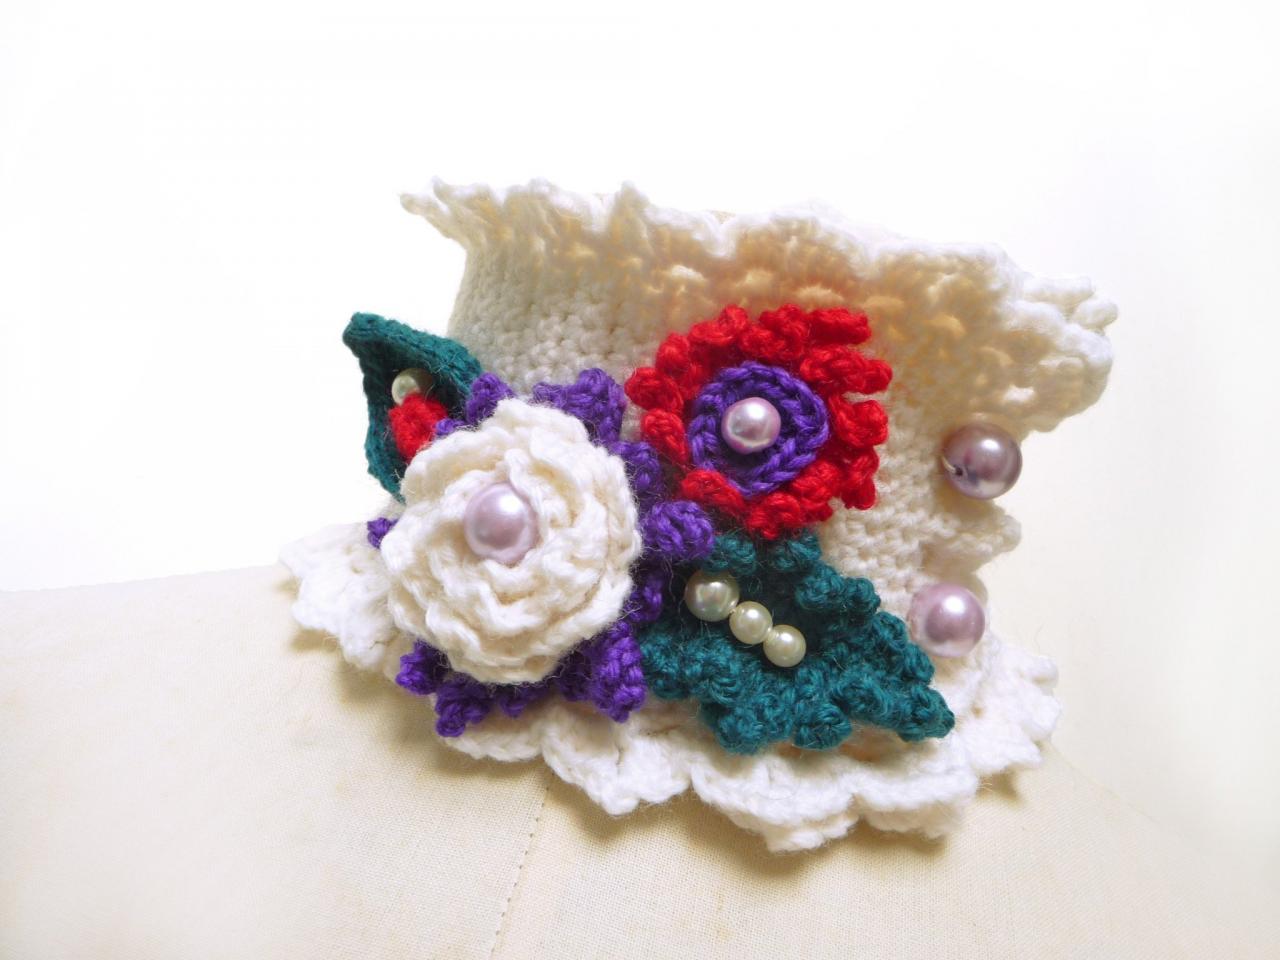 White Crocheted Cowl Neckwarmer with red + purple flowers, green leaves and glass pearls, Wool Scarf Necklace, Christmas Gift, WINTER GARDEN